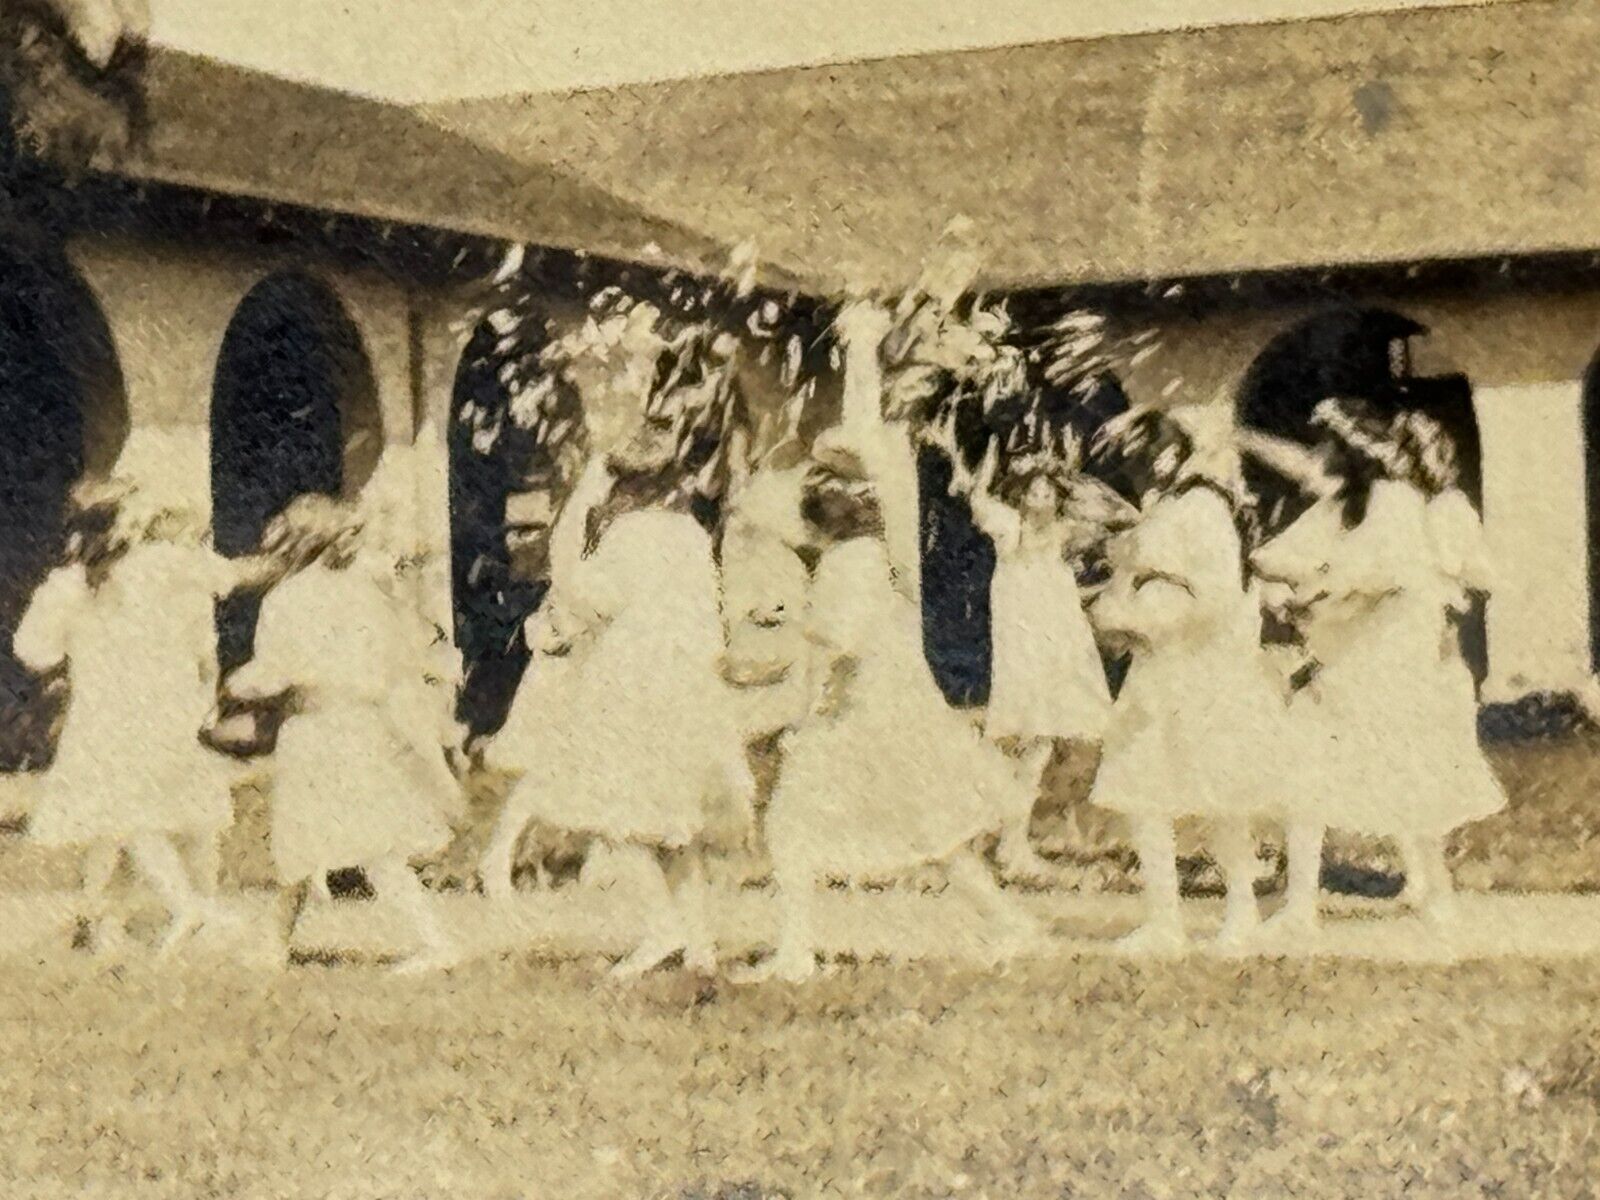 2H Photograph 1917 May Day School Children Celebration Girls Throwing Flowers